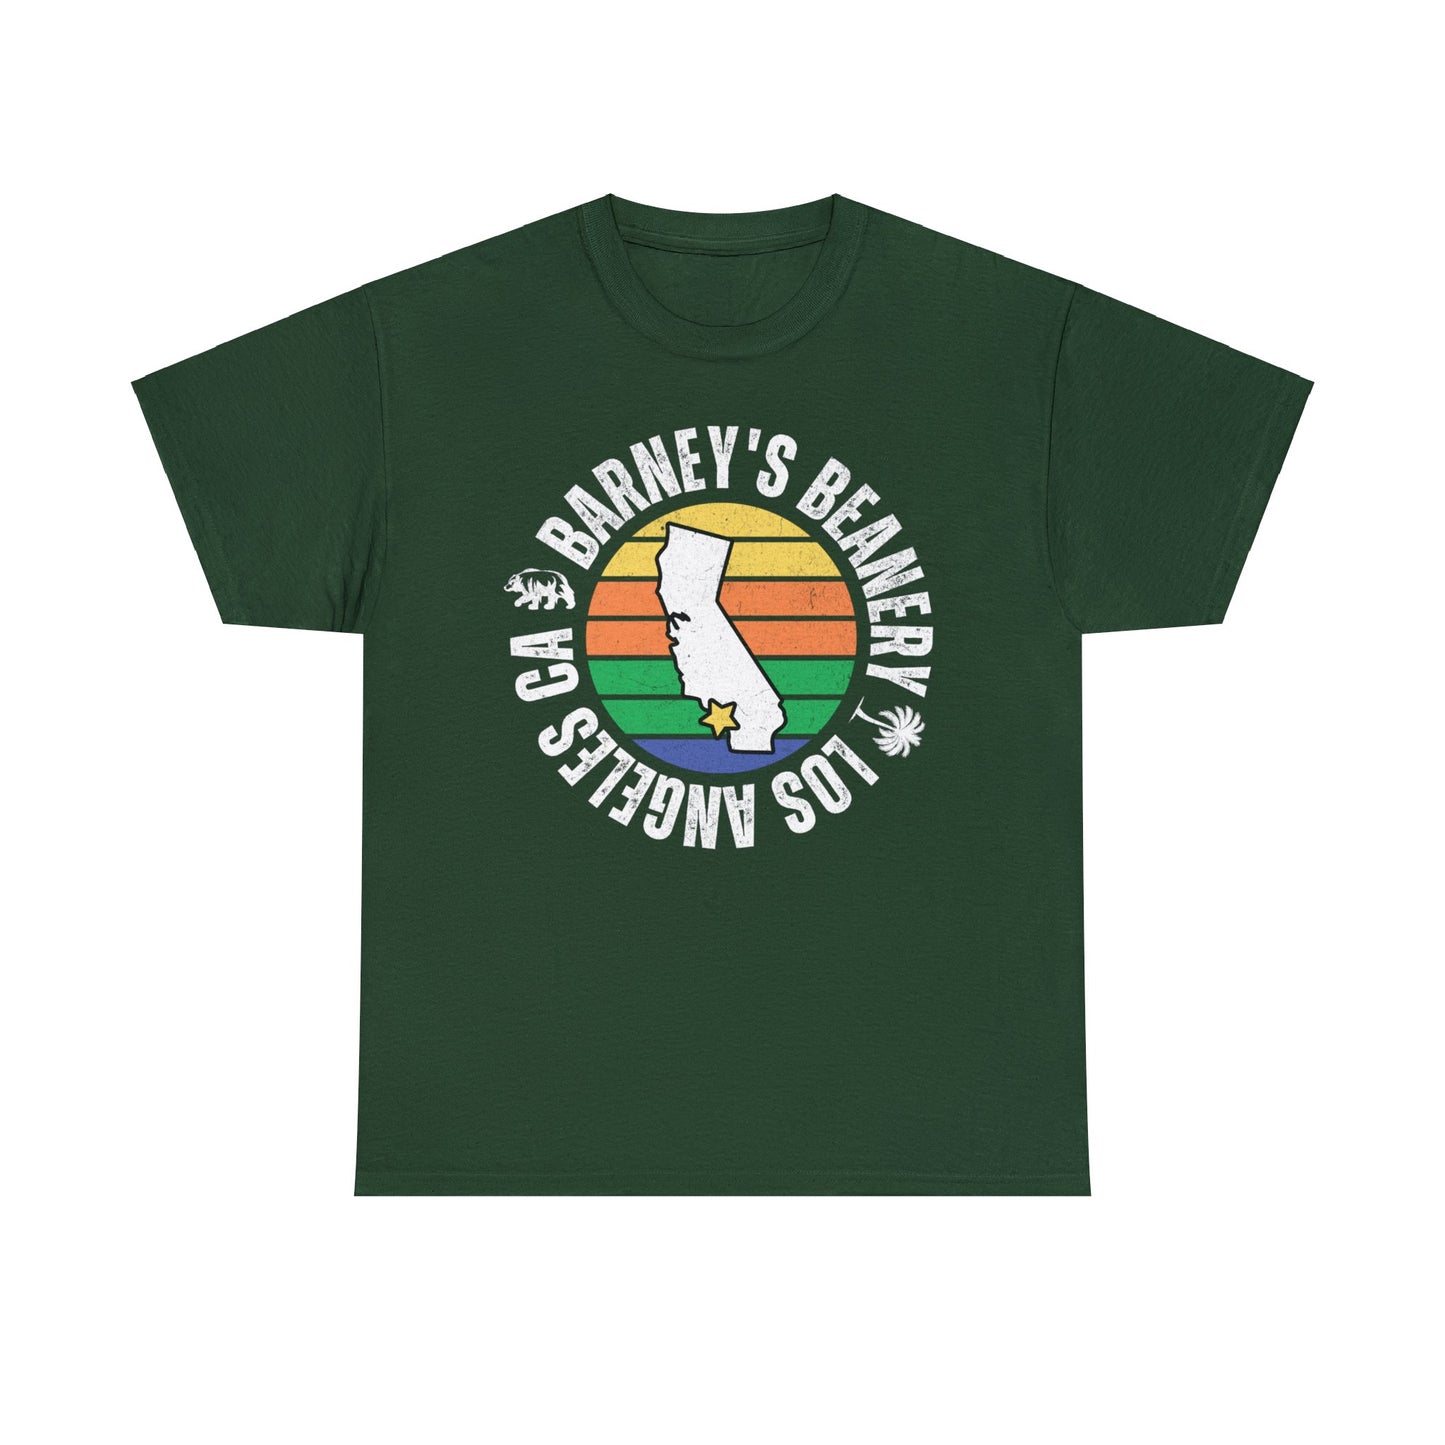 Retro Sunset | BARNEY'S BEANERY - Men's Retro Graphic Tee | Forest Green Gildan 5000, Front View Flat Lay